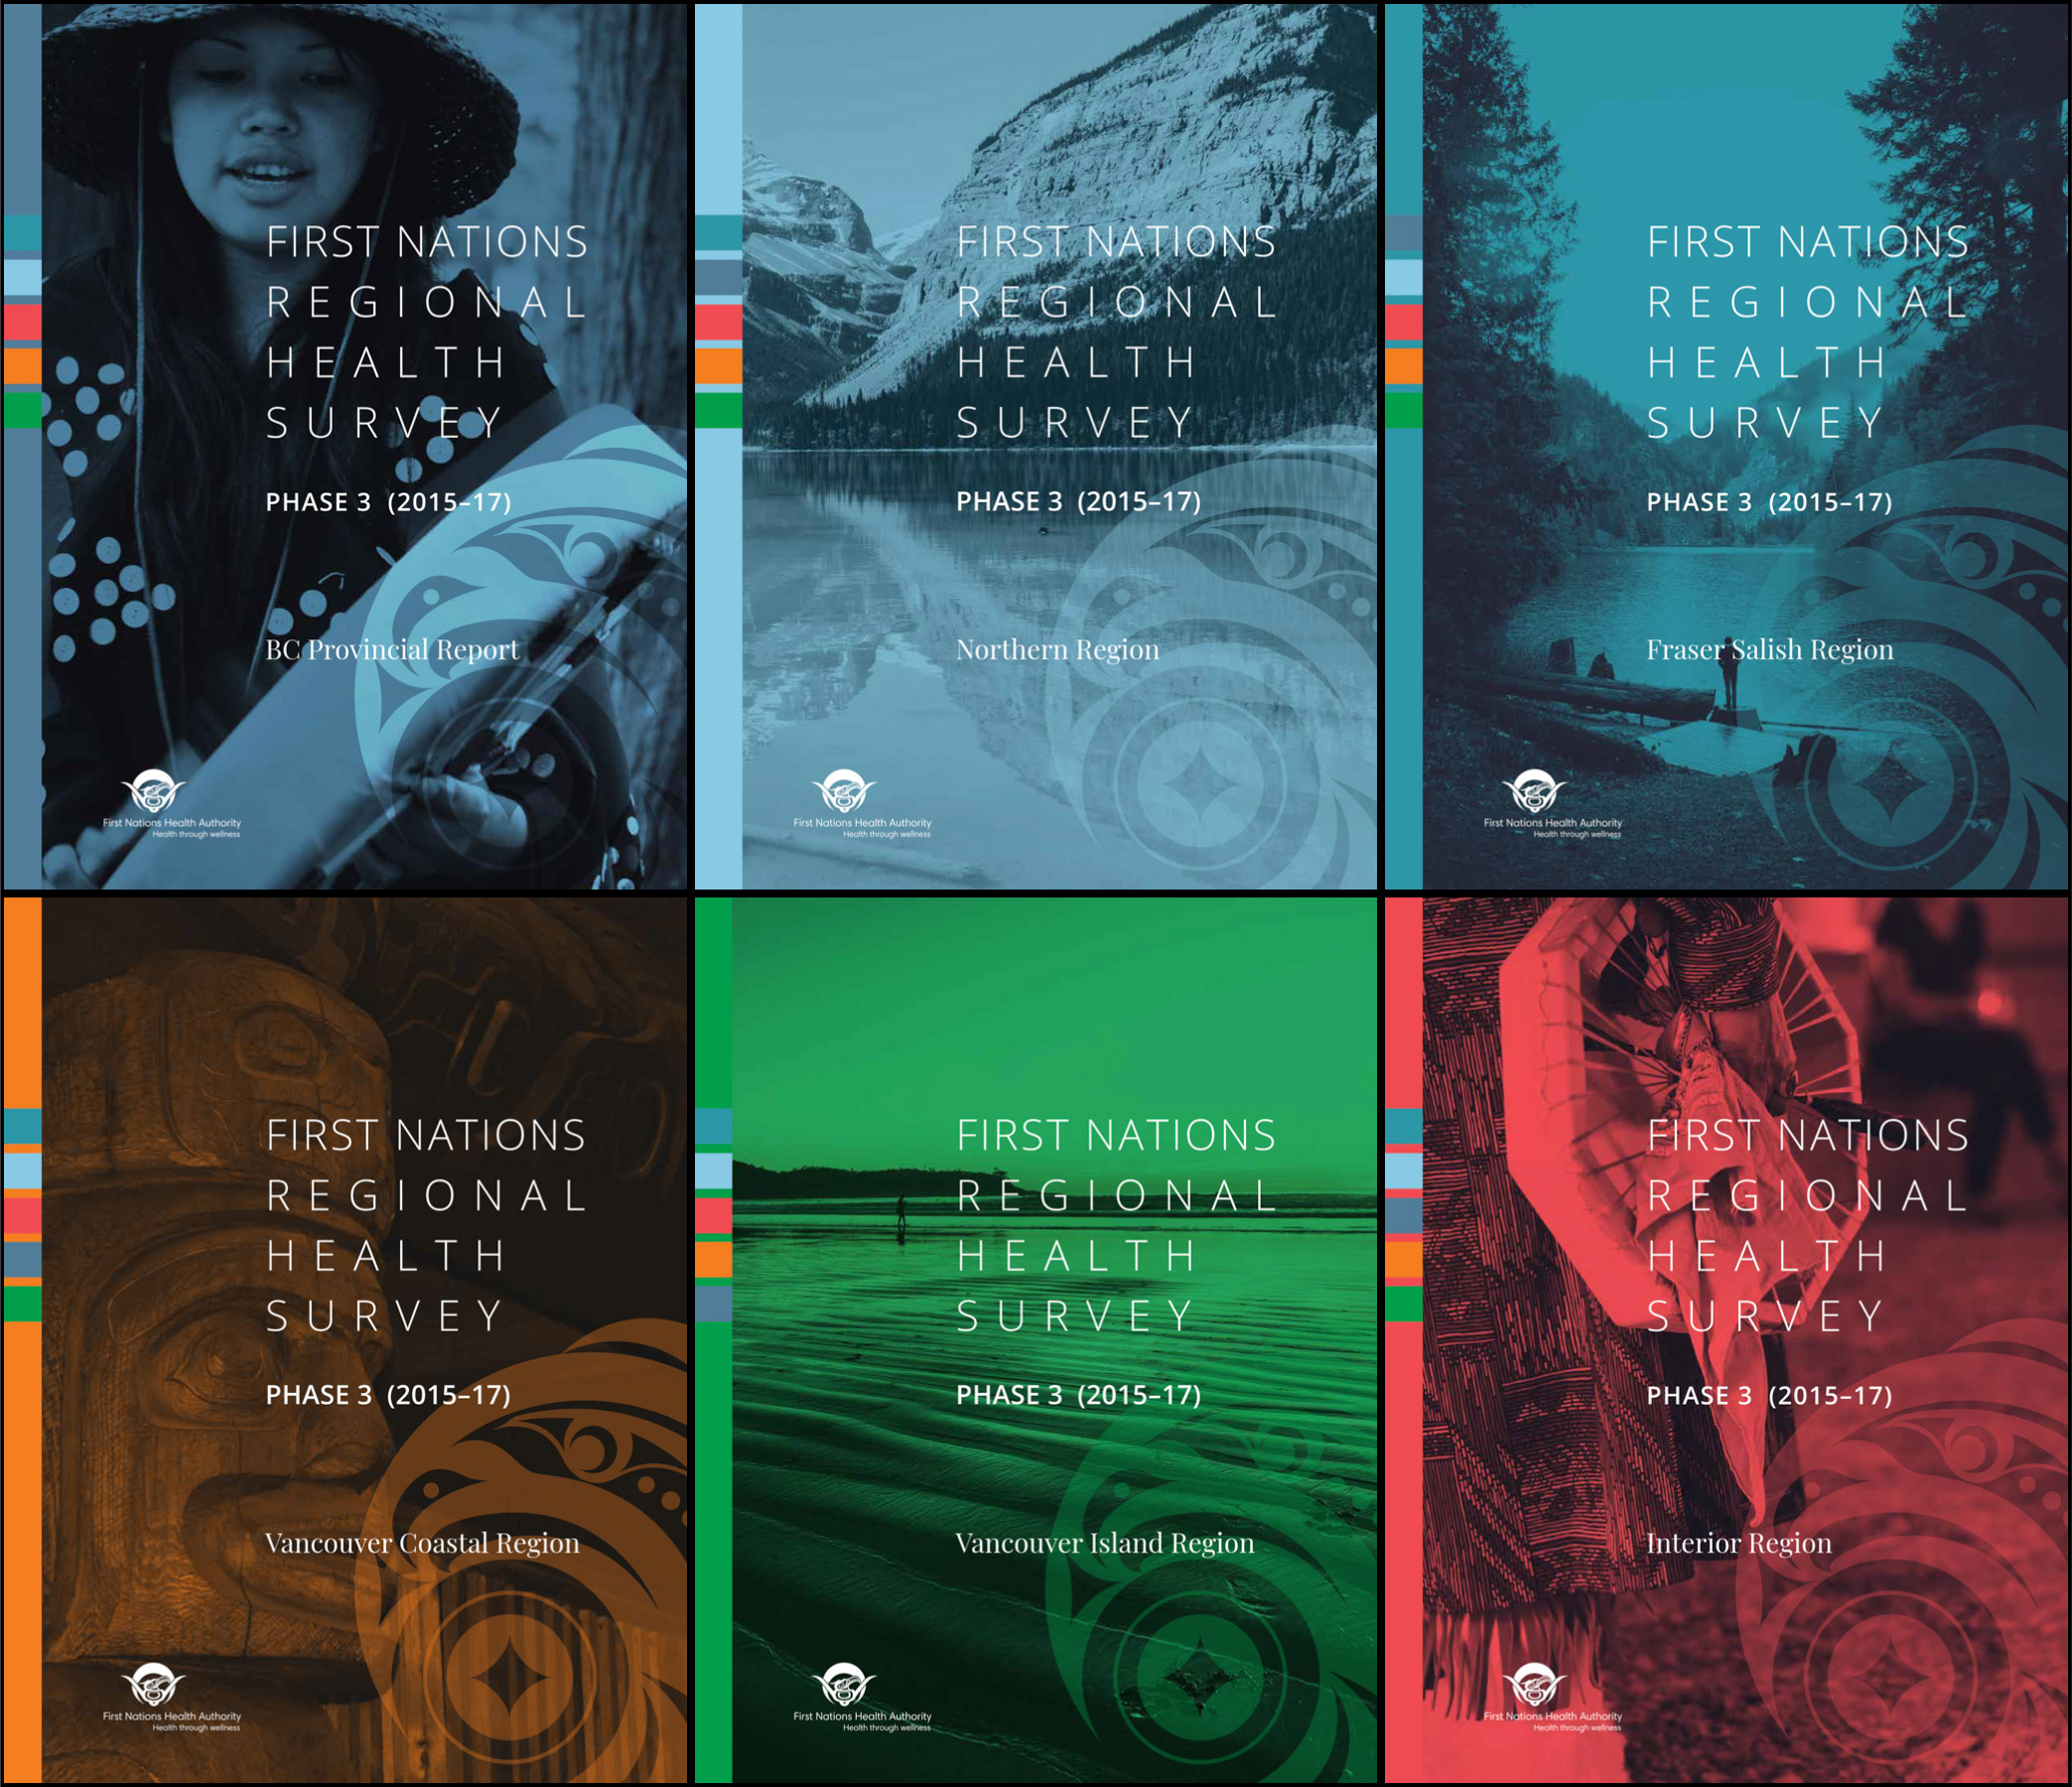 FNHA-First-Nations-Regional-Health-Survey-Phase-3-2015-2017-Covers.jpg